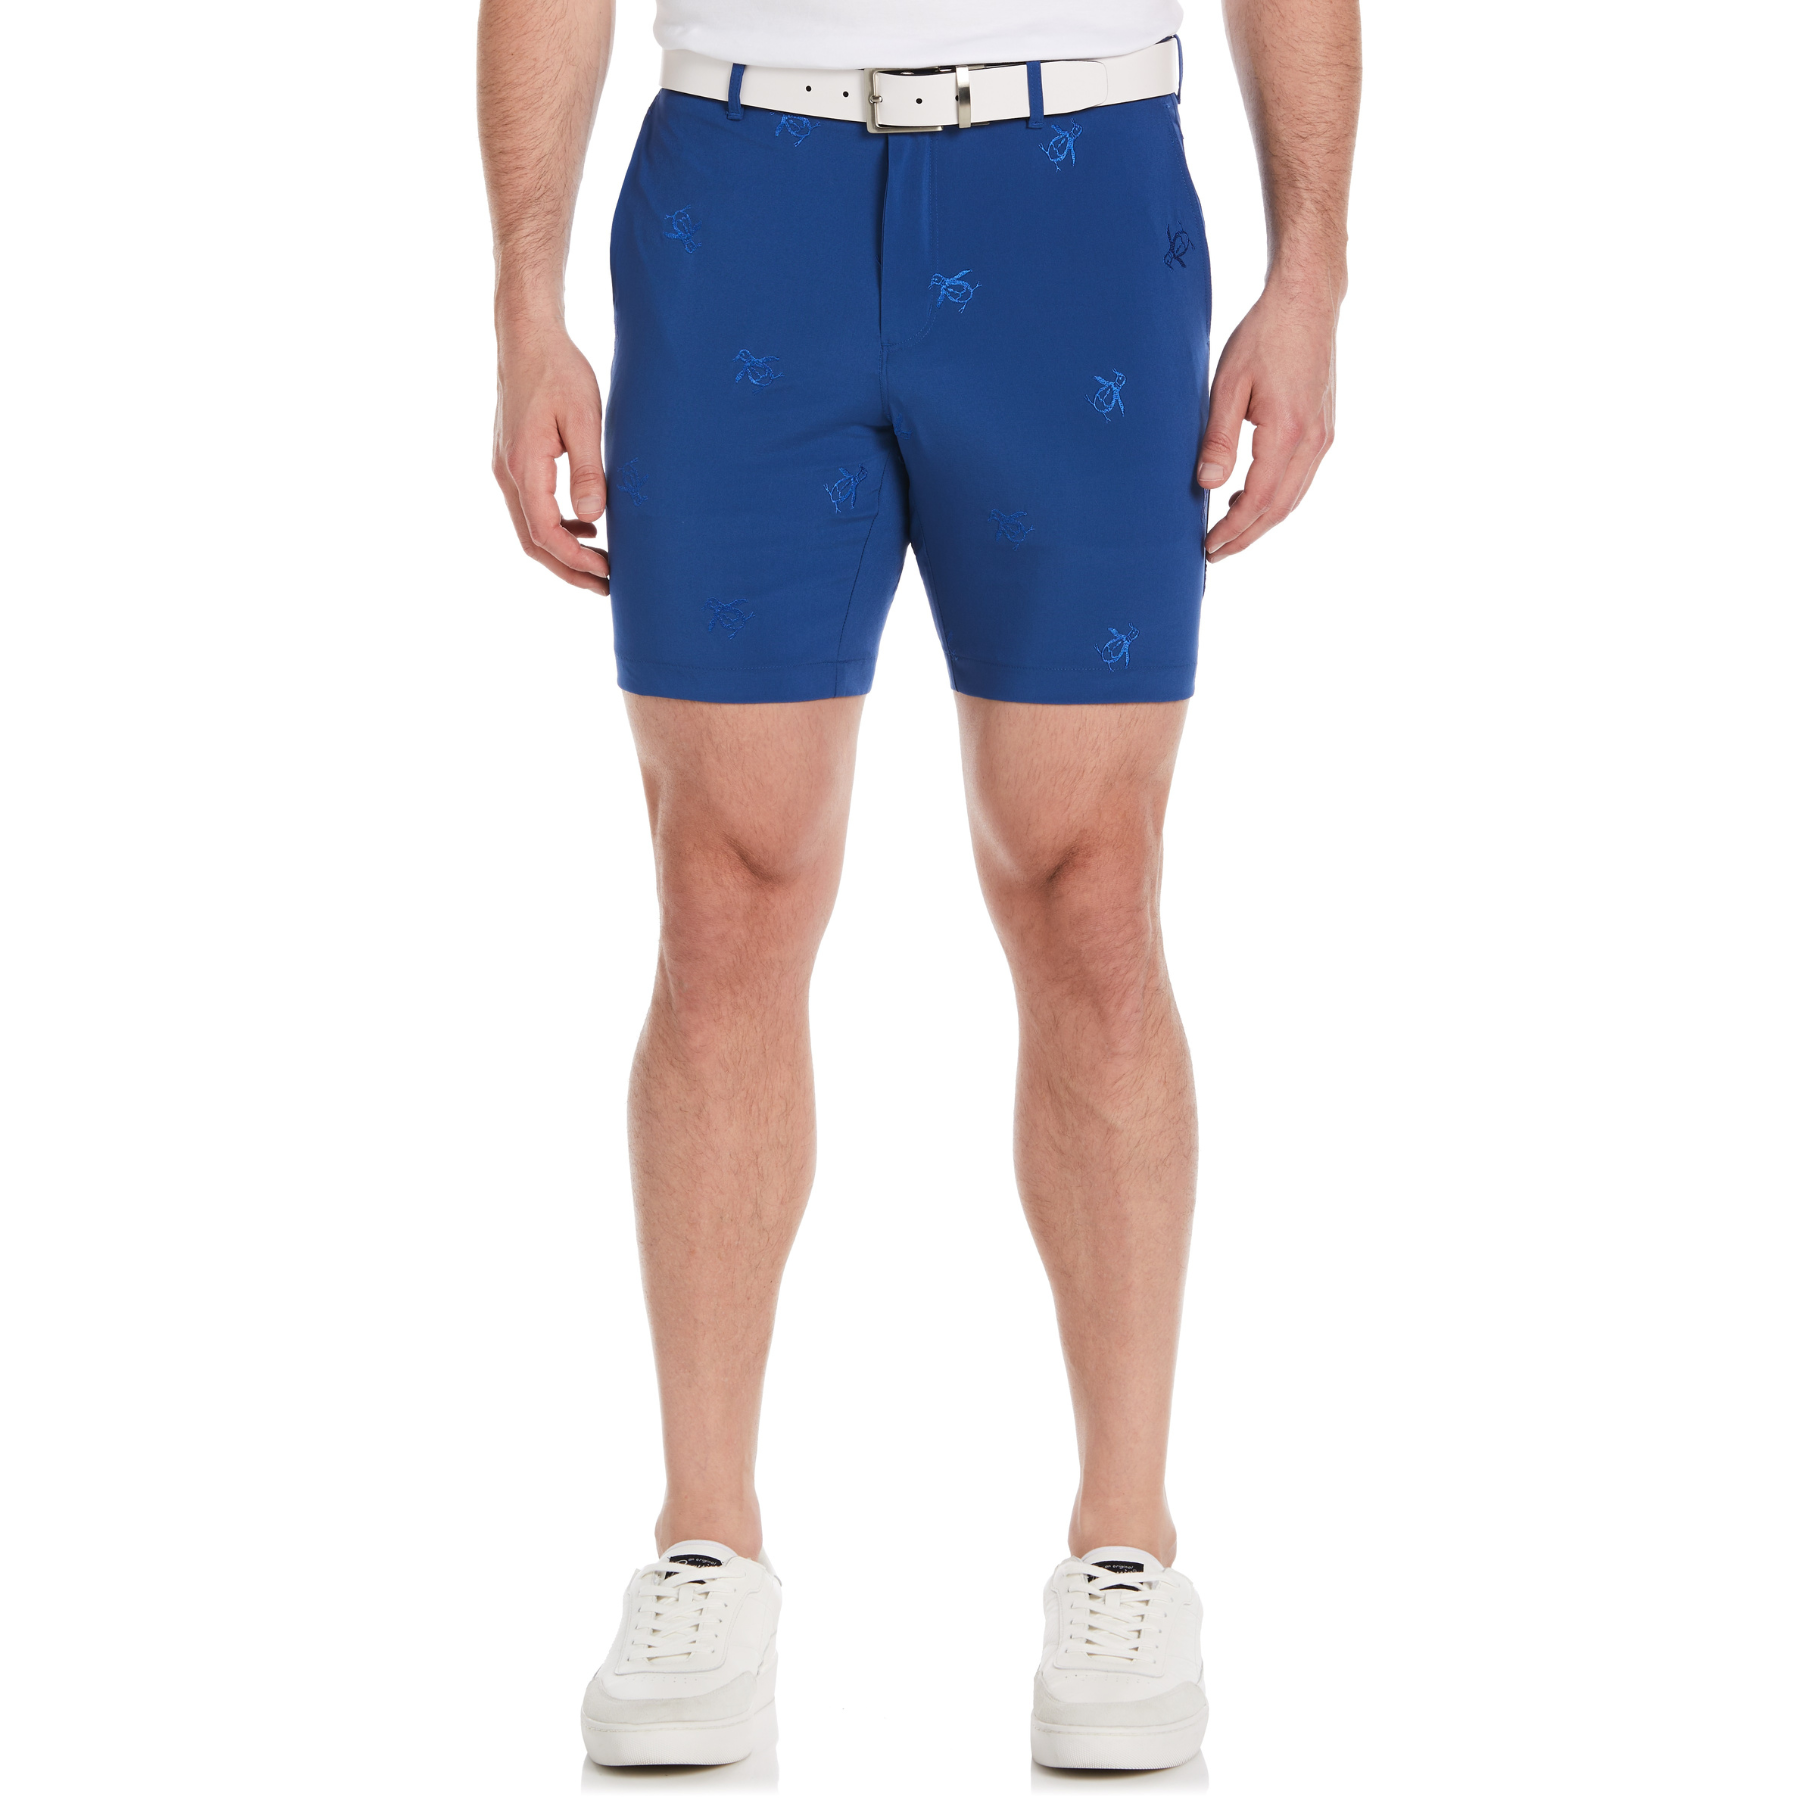 View Space Dye Embriodered Golf Shorts In Limoges information